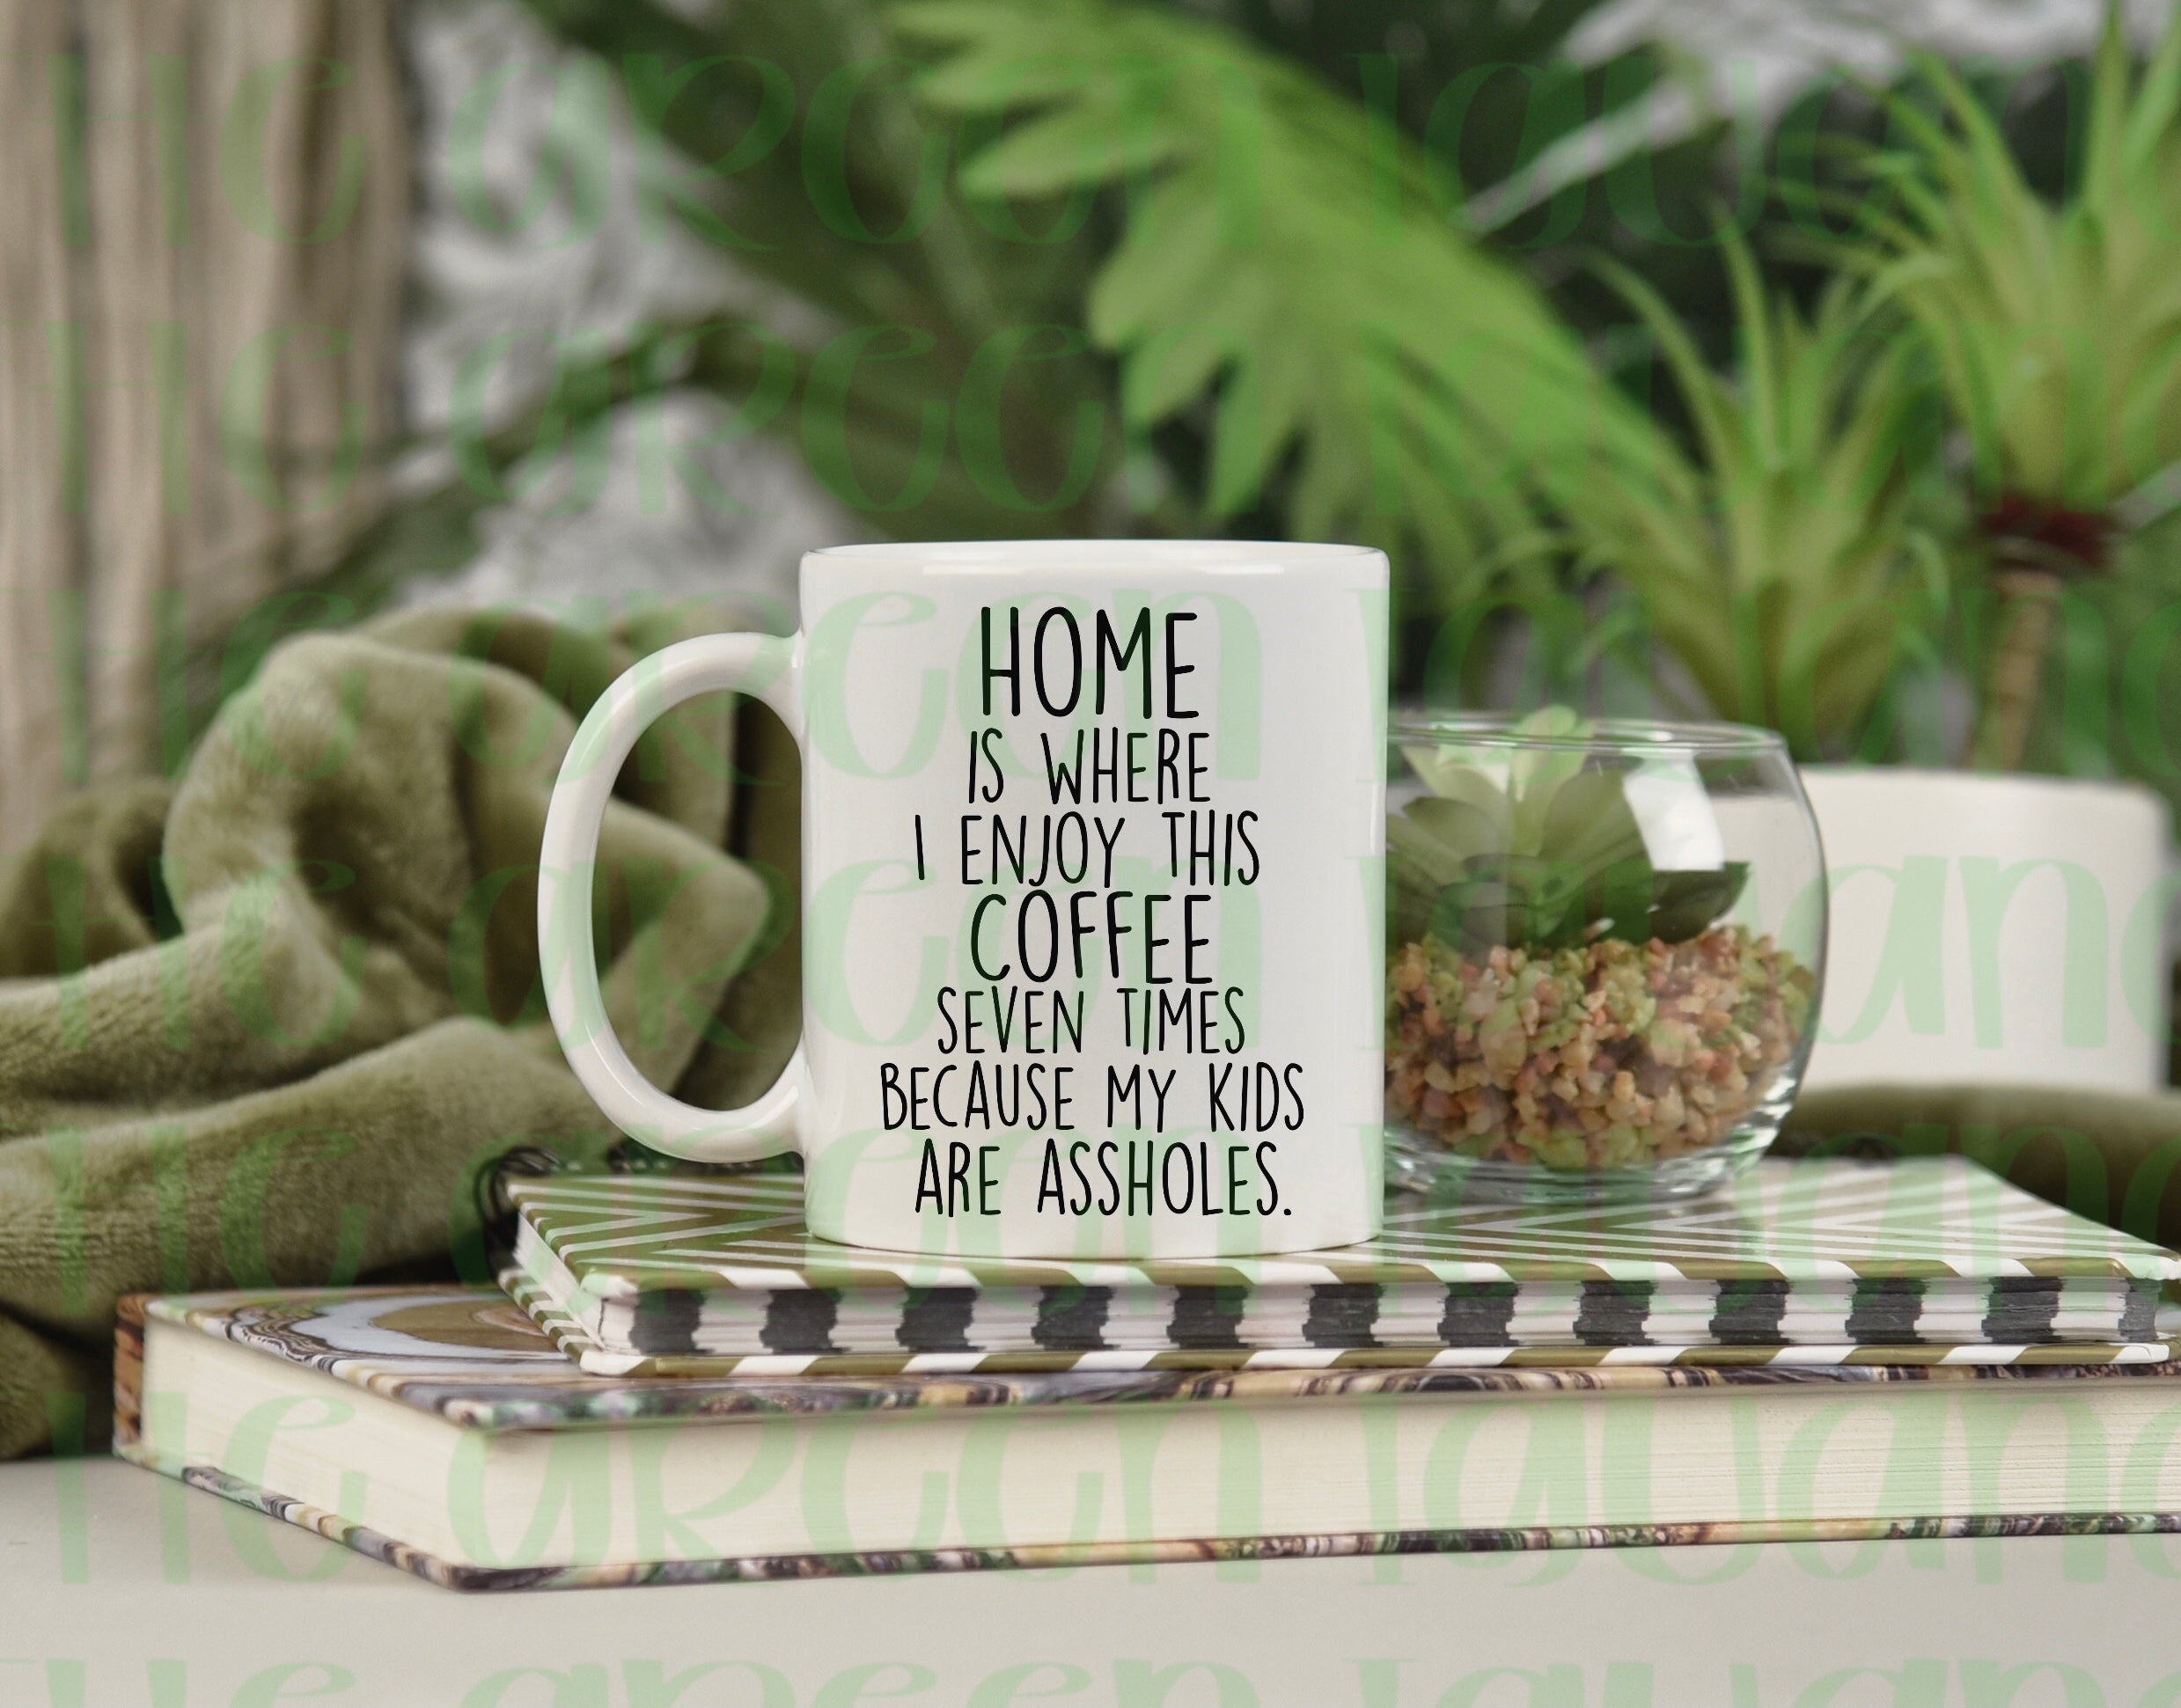 Home is where I enjoy this coffee seven times because my kids are assholes. - DTF transfer